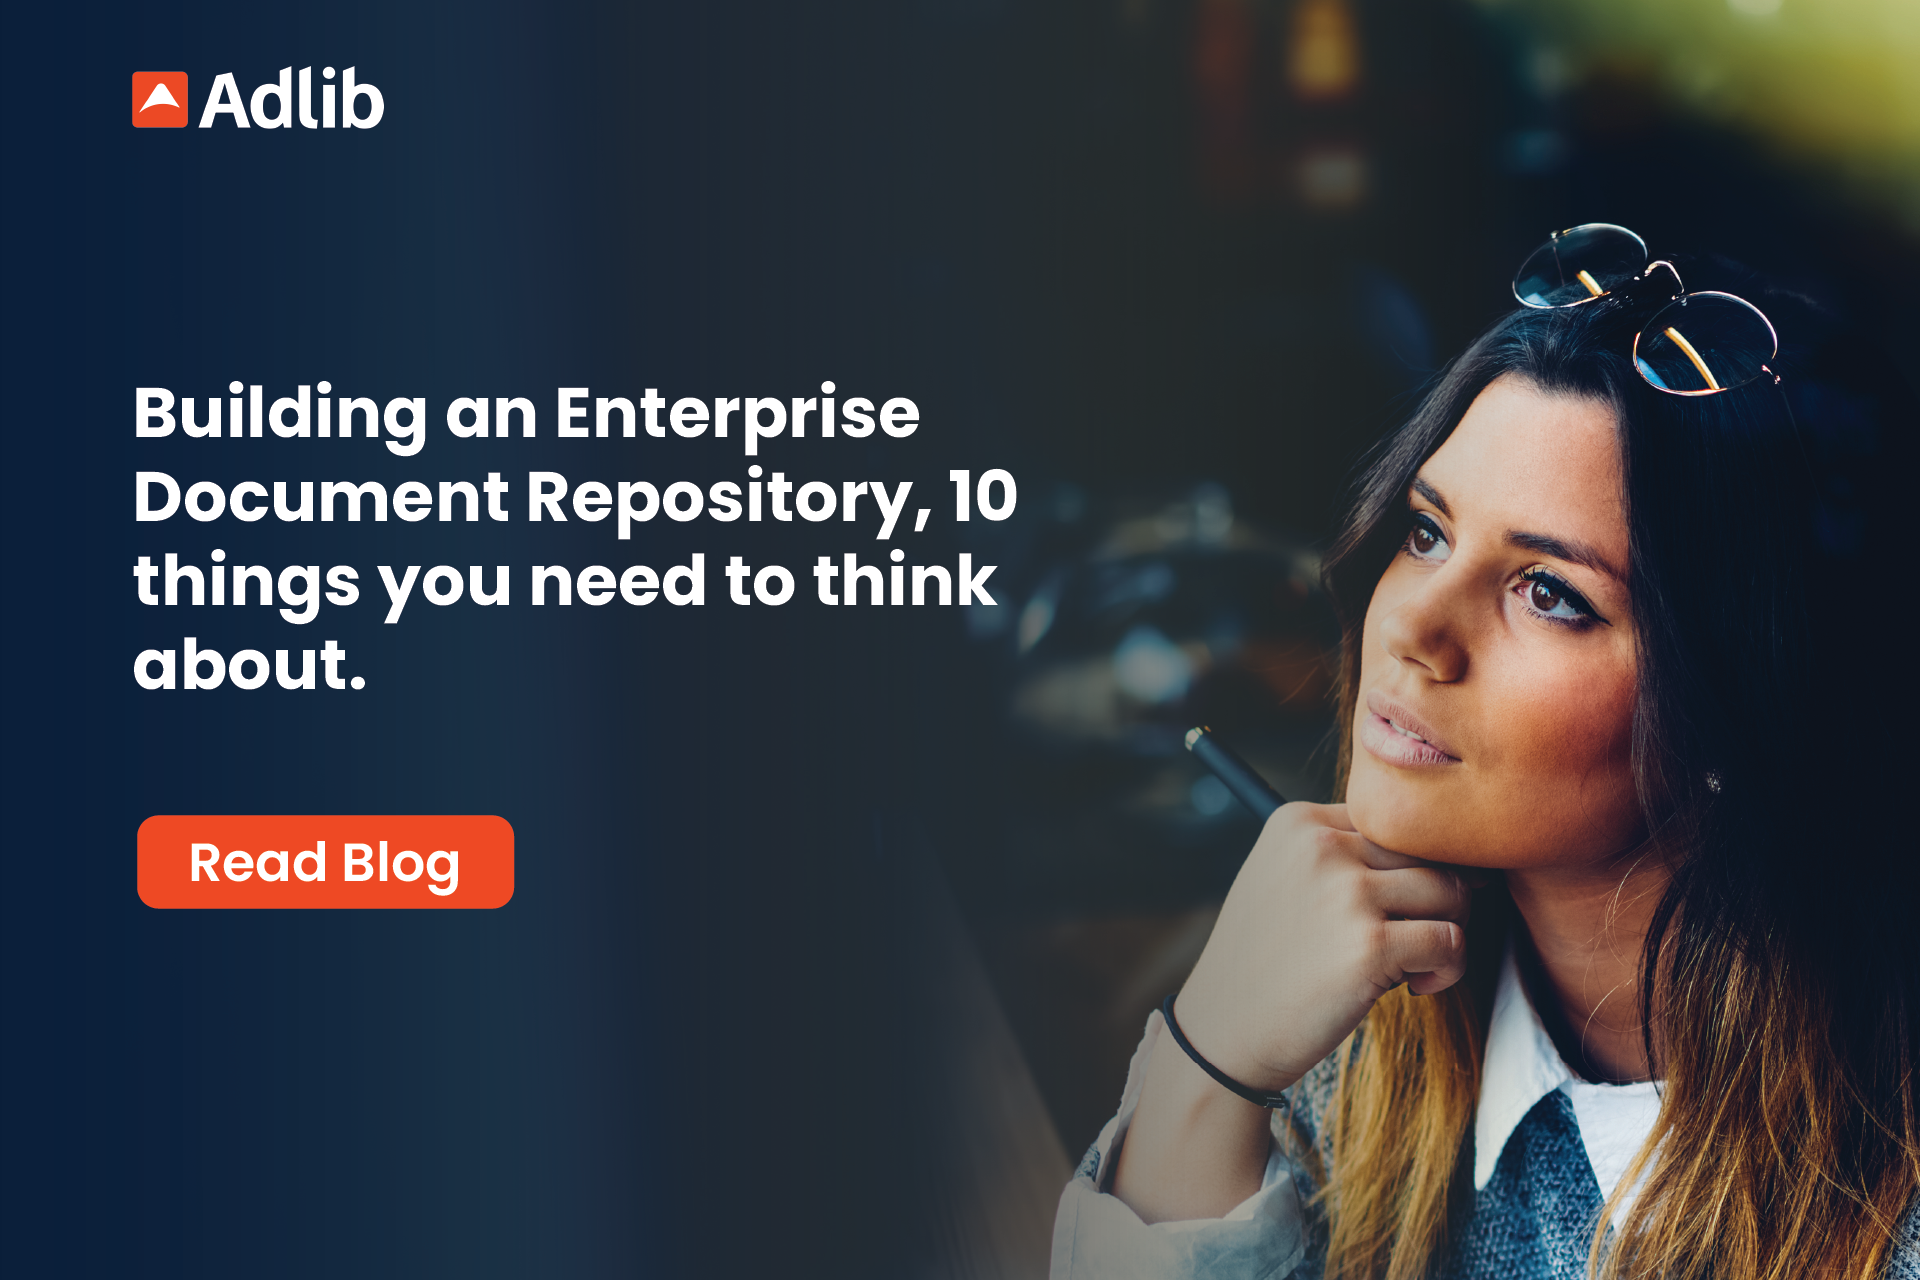 Building an Enterprise Document Repository, 10 things you need to think about. Featured Image